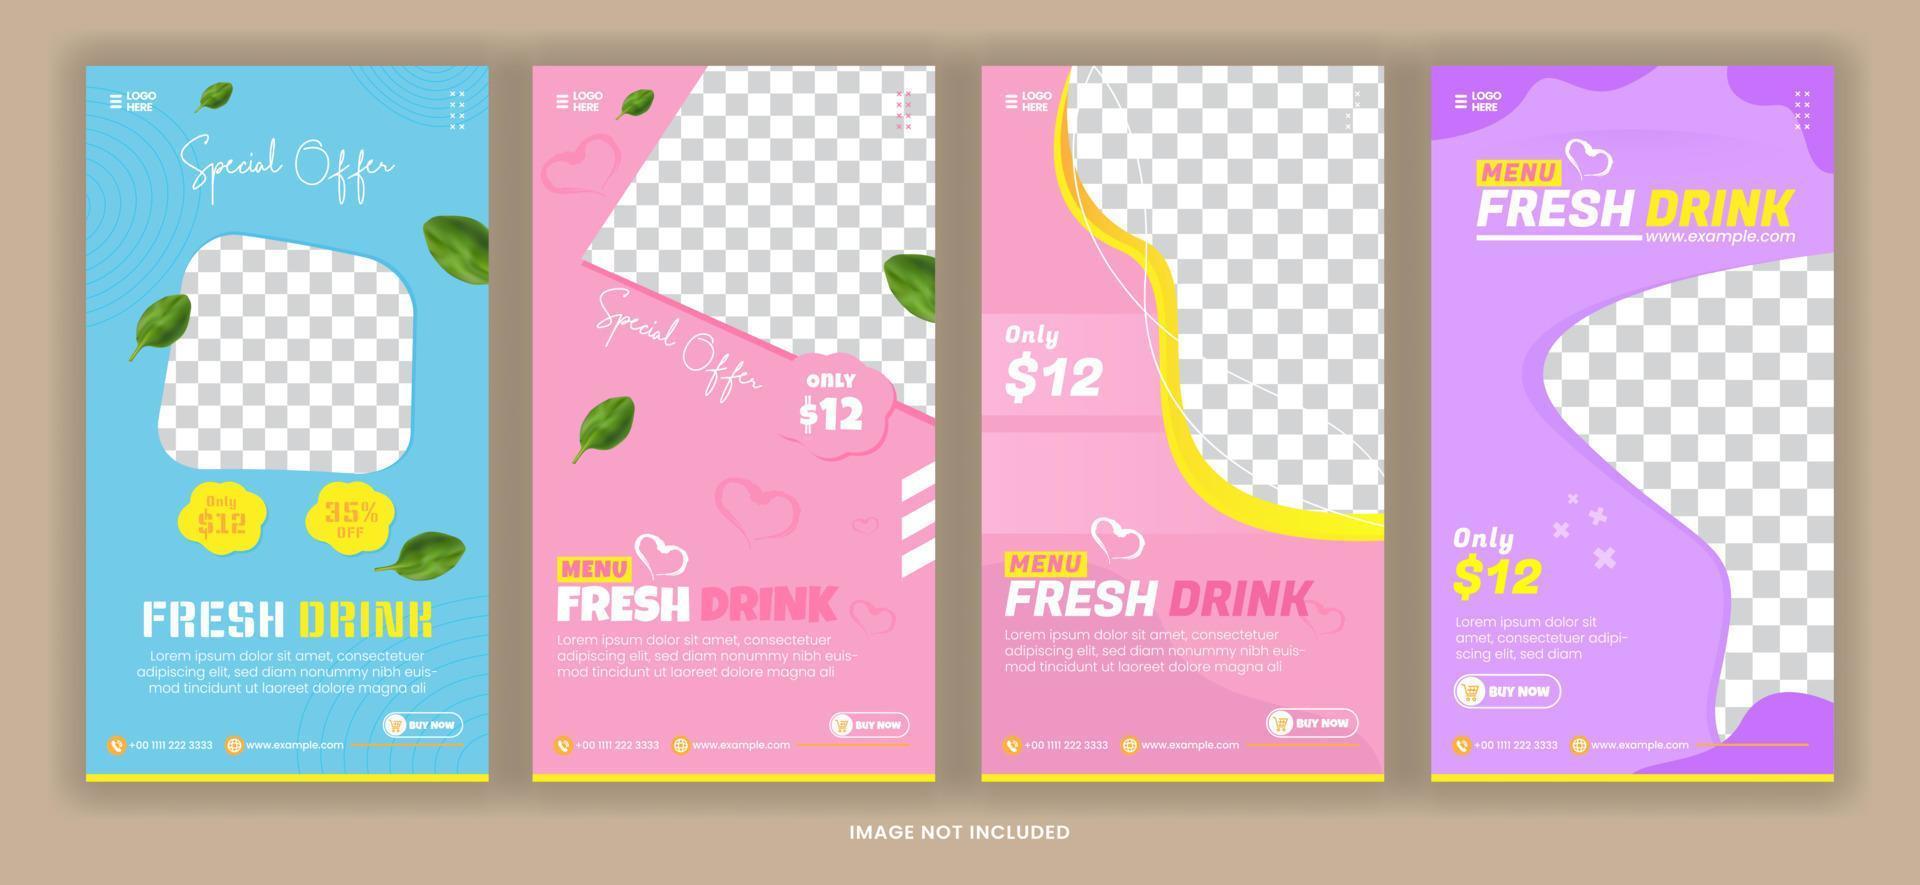 Story Post Bundle fresh drink for Social Media Promotion With Fulcolor Template vector